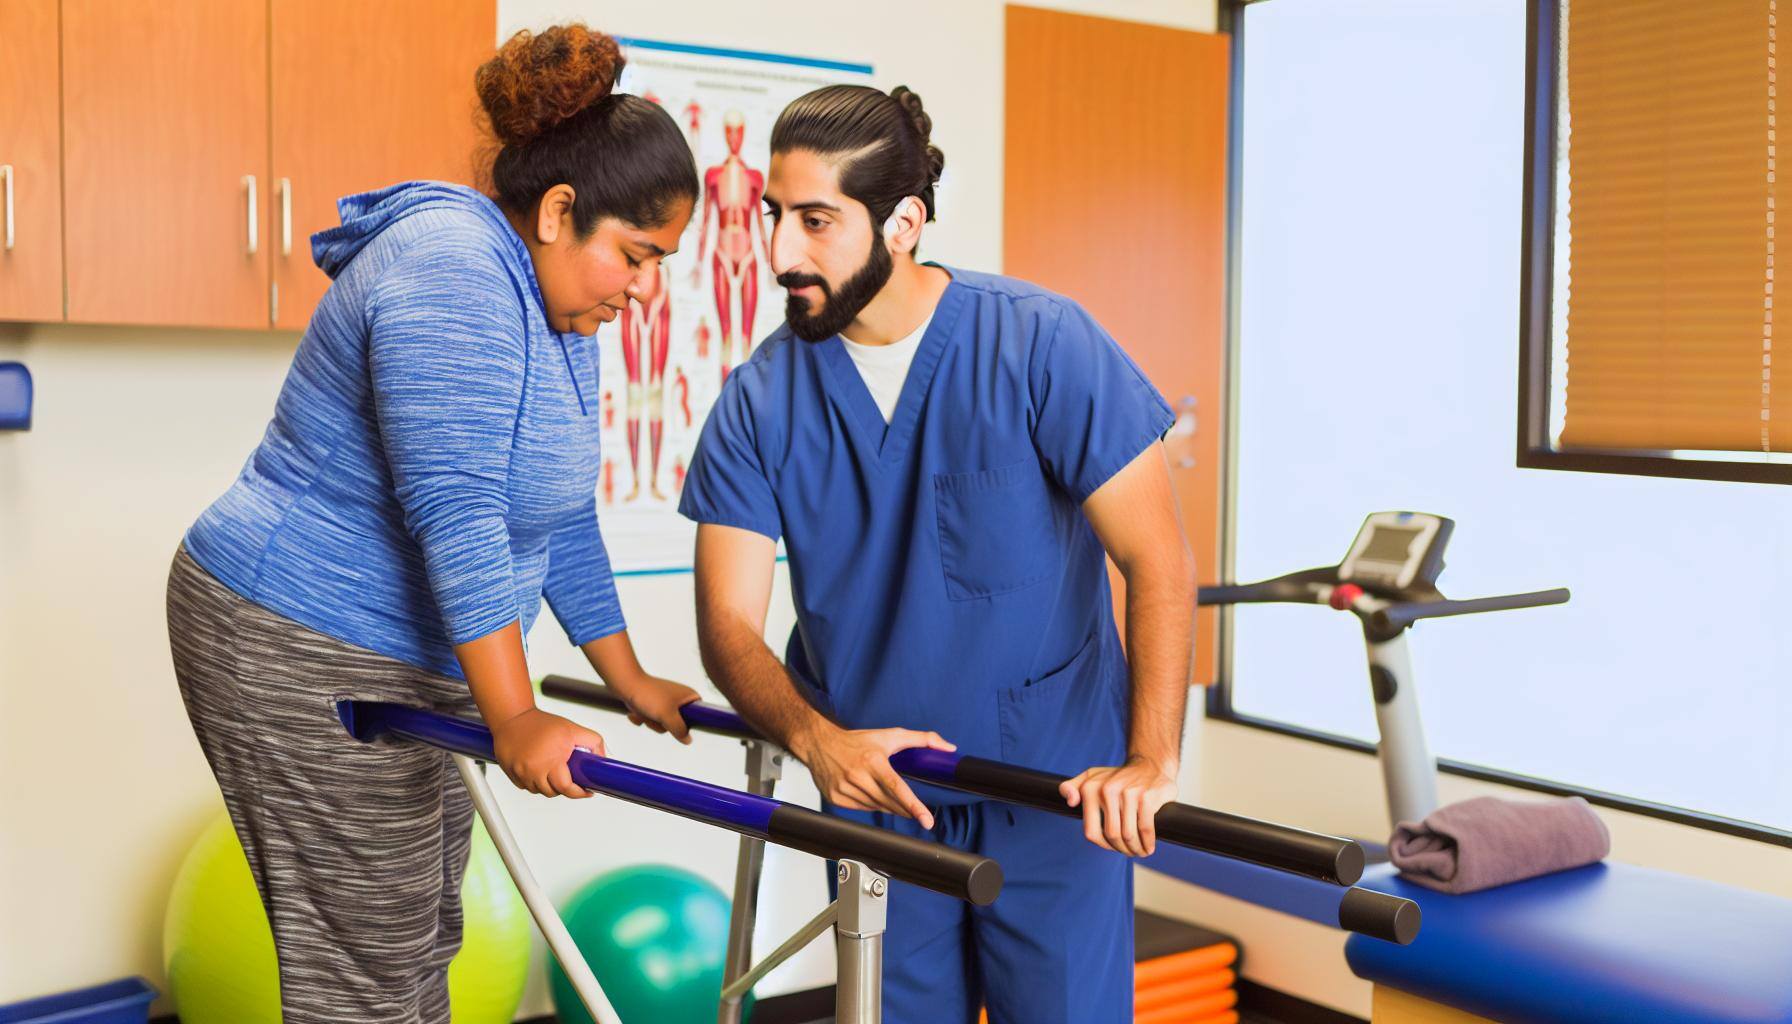 Physical Therapy Aide & Adminstration Specialist Online Career Program